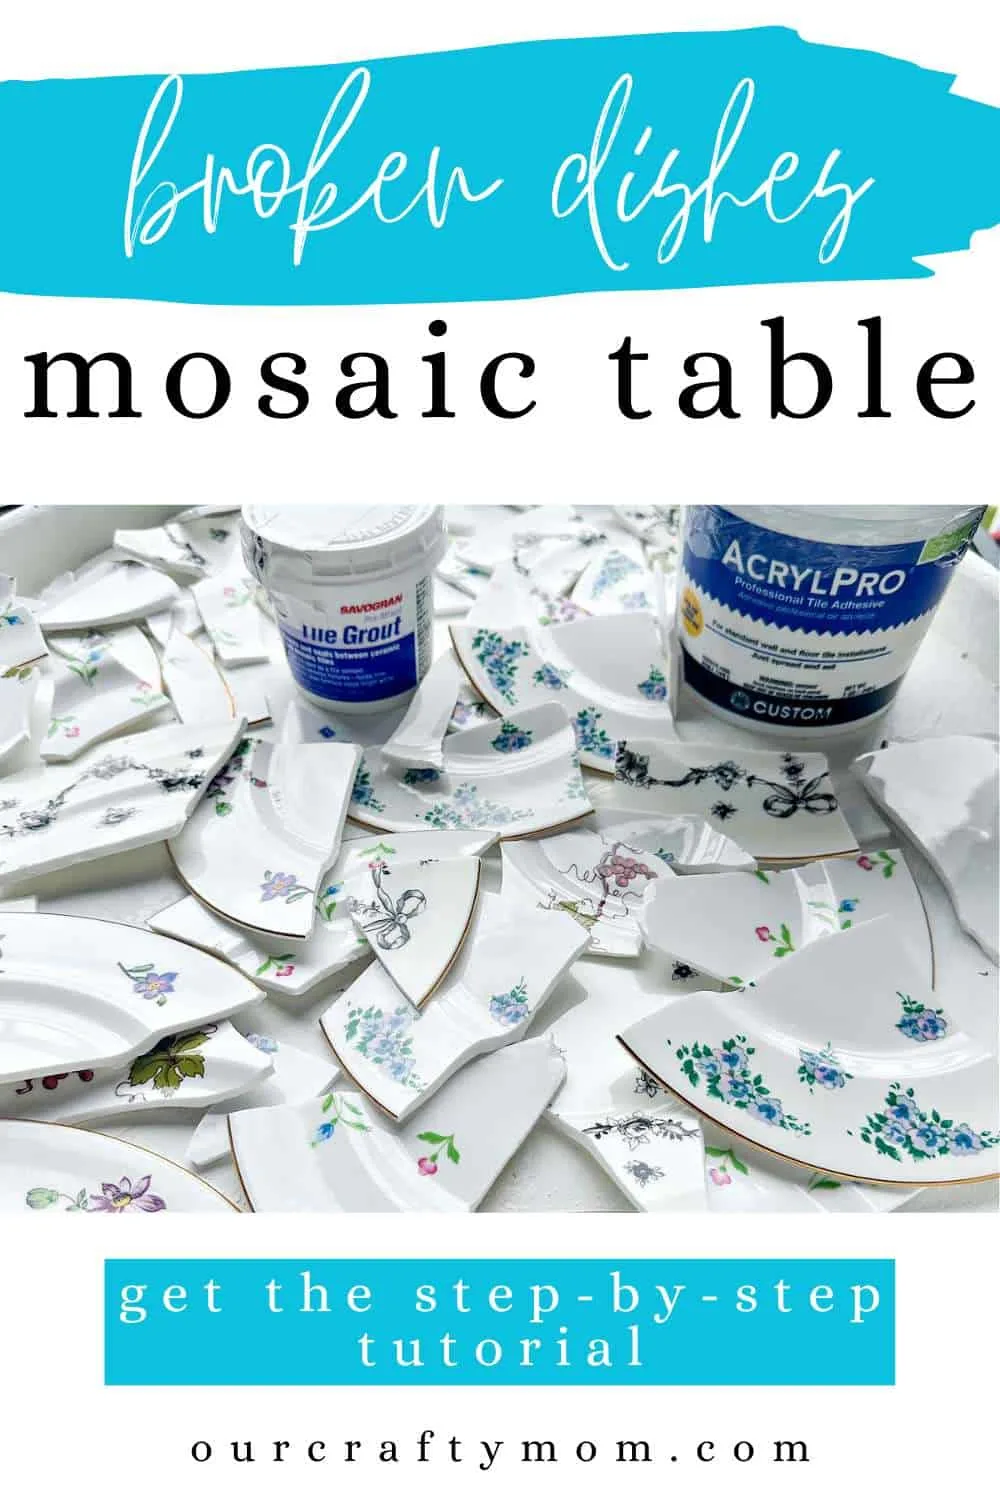 broken dishes mosaic table pin with text